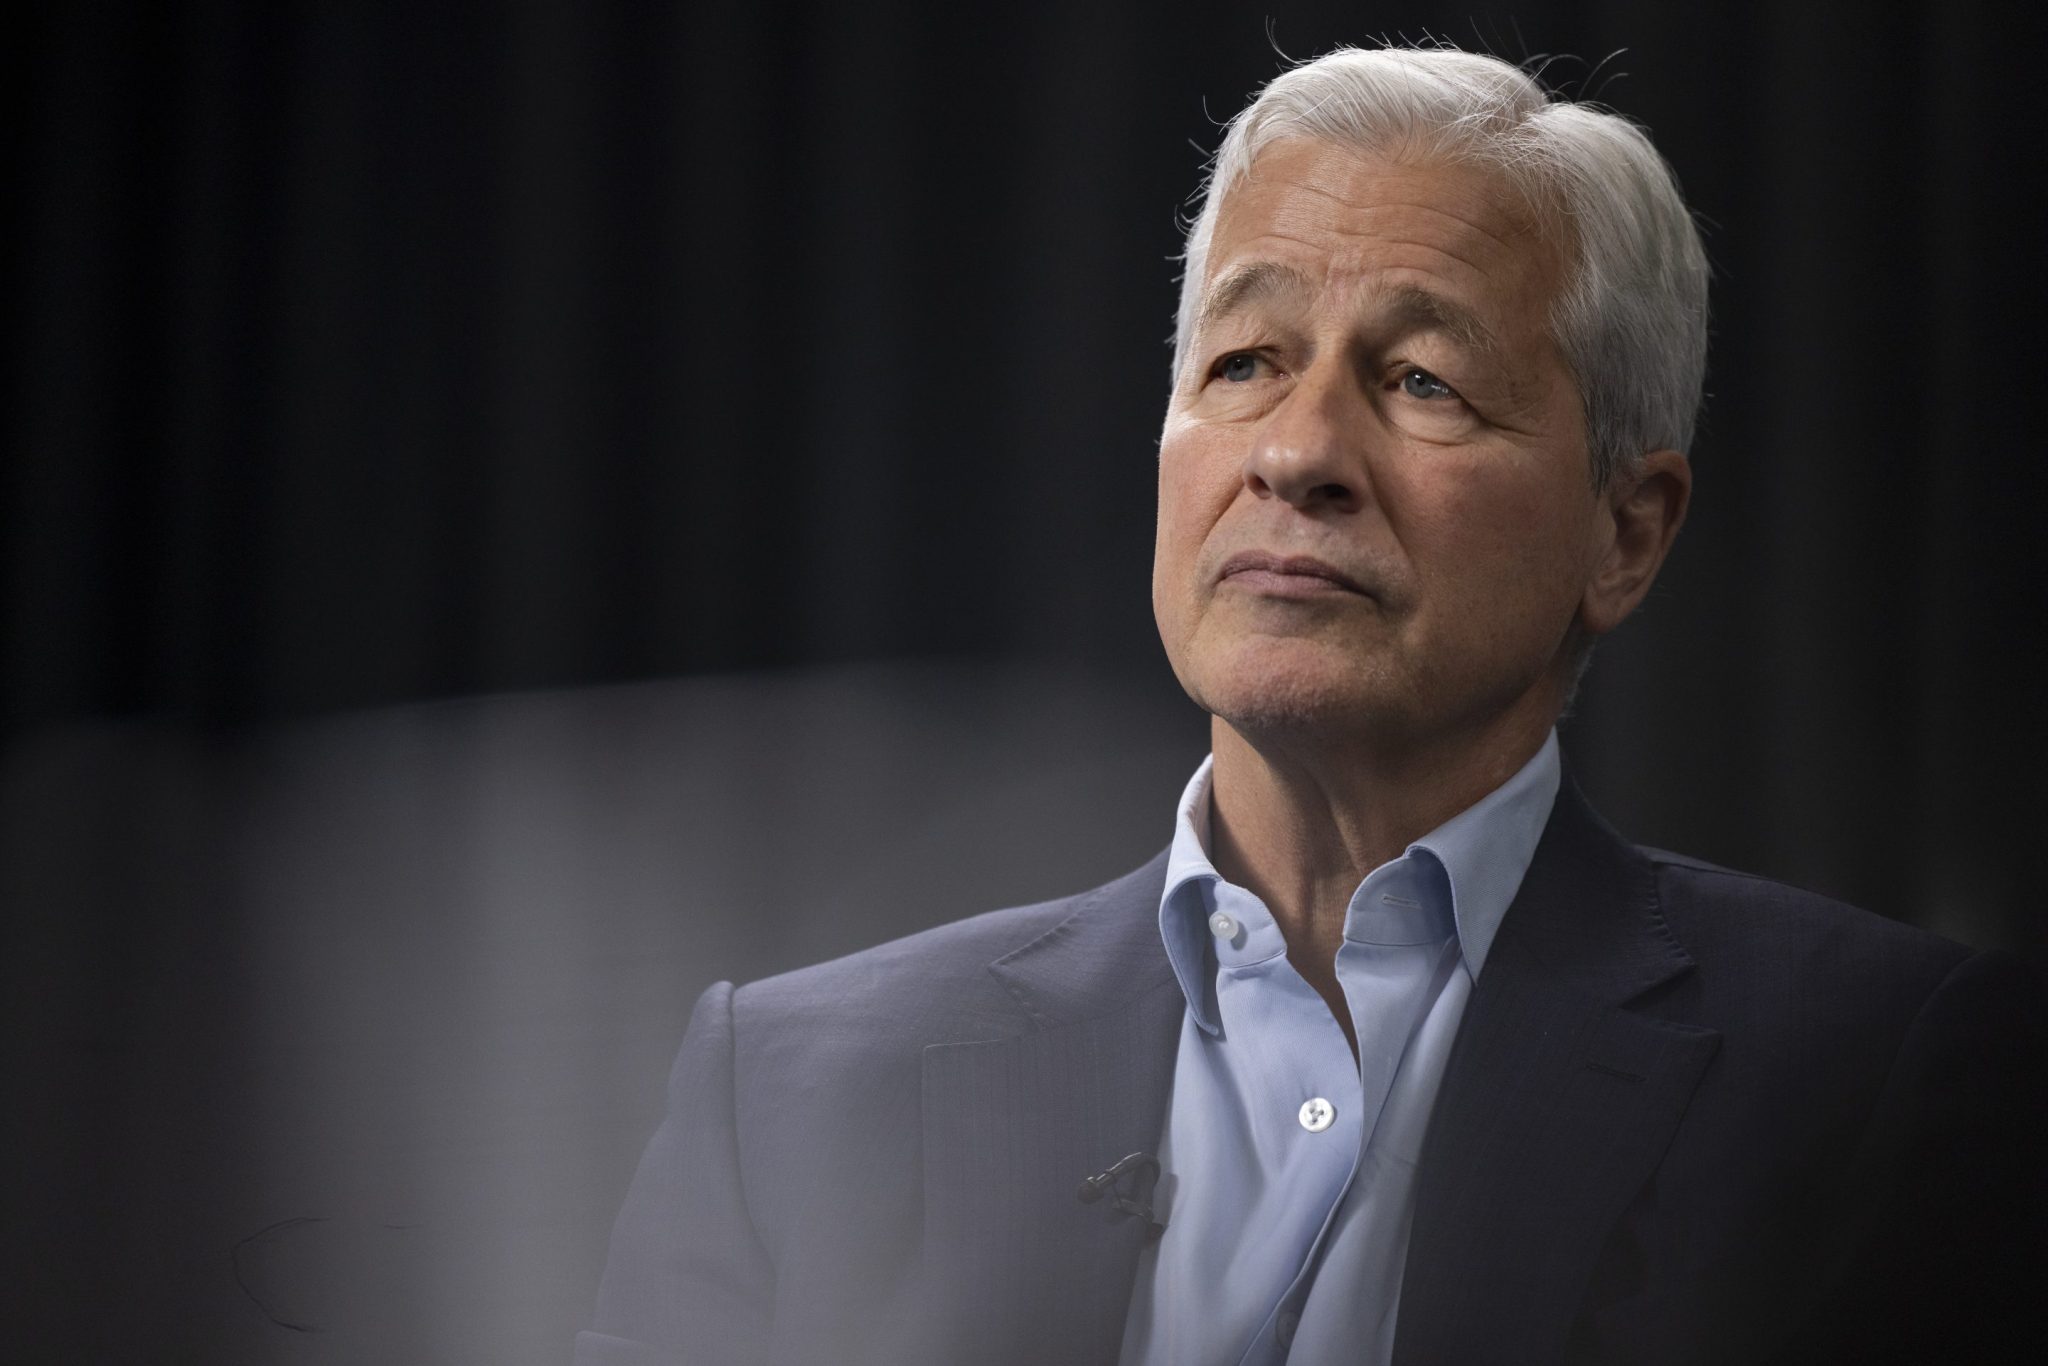 JPMorgan Chase CEO Jamie Dimon warns the Israel-Hamas conflict ‘may have far reaching impacts’ for the economy. ‘This may be the most dangerous time the world has seen in decades’